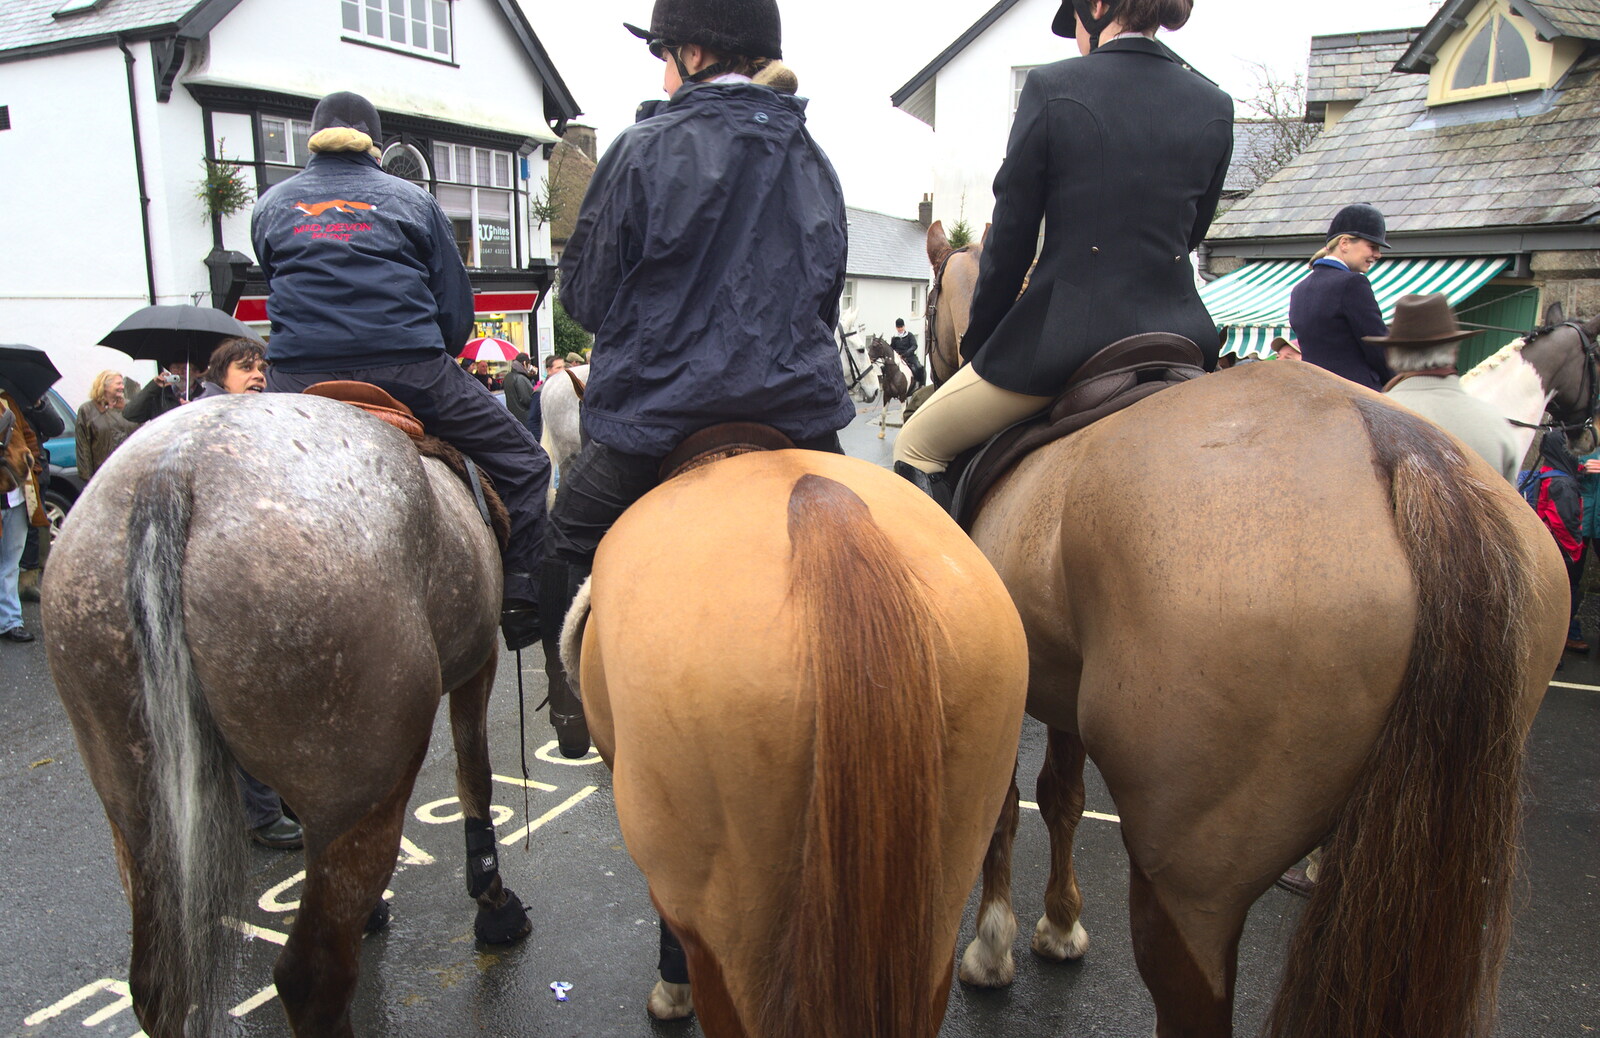 Three horses' arses from The Boxing Day Hunt, Chagford, Devon - 26th December 2012